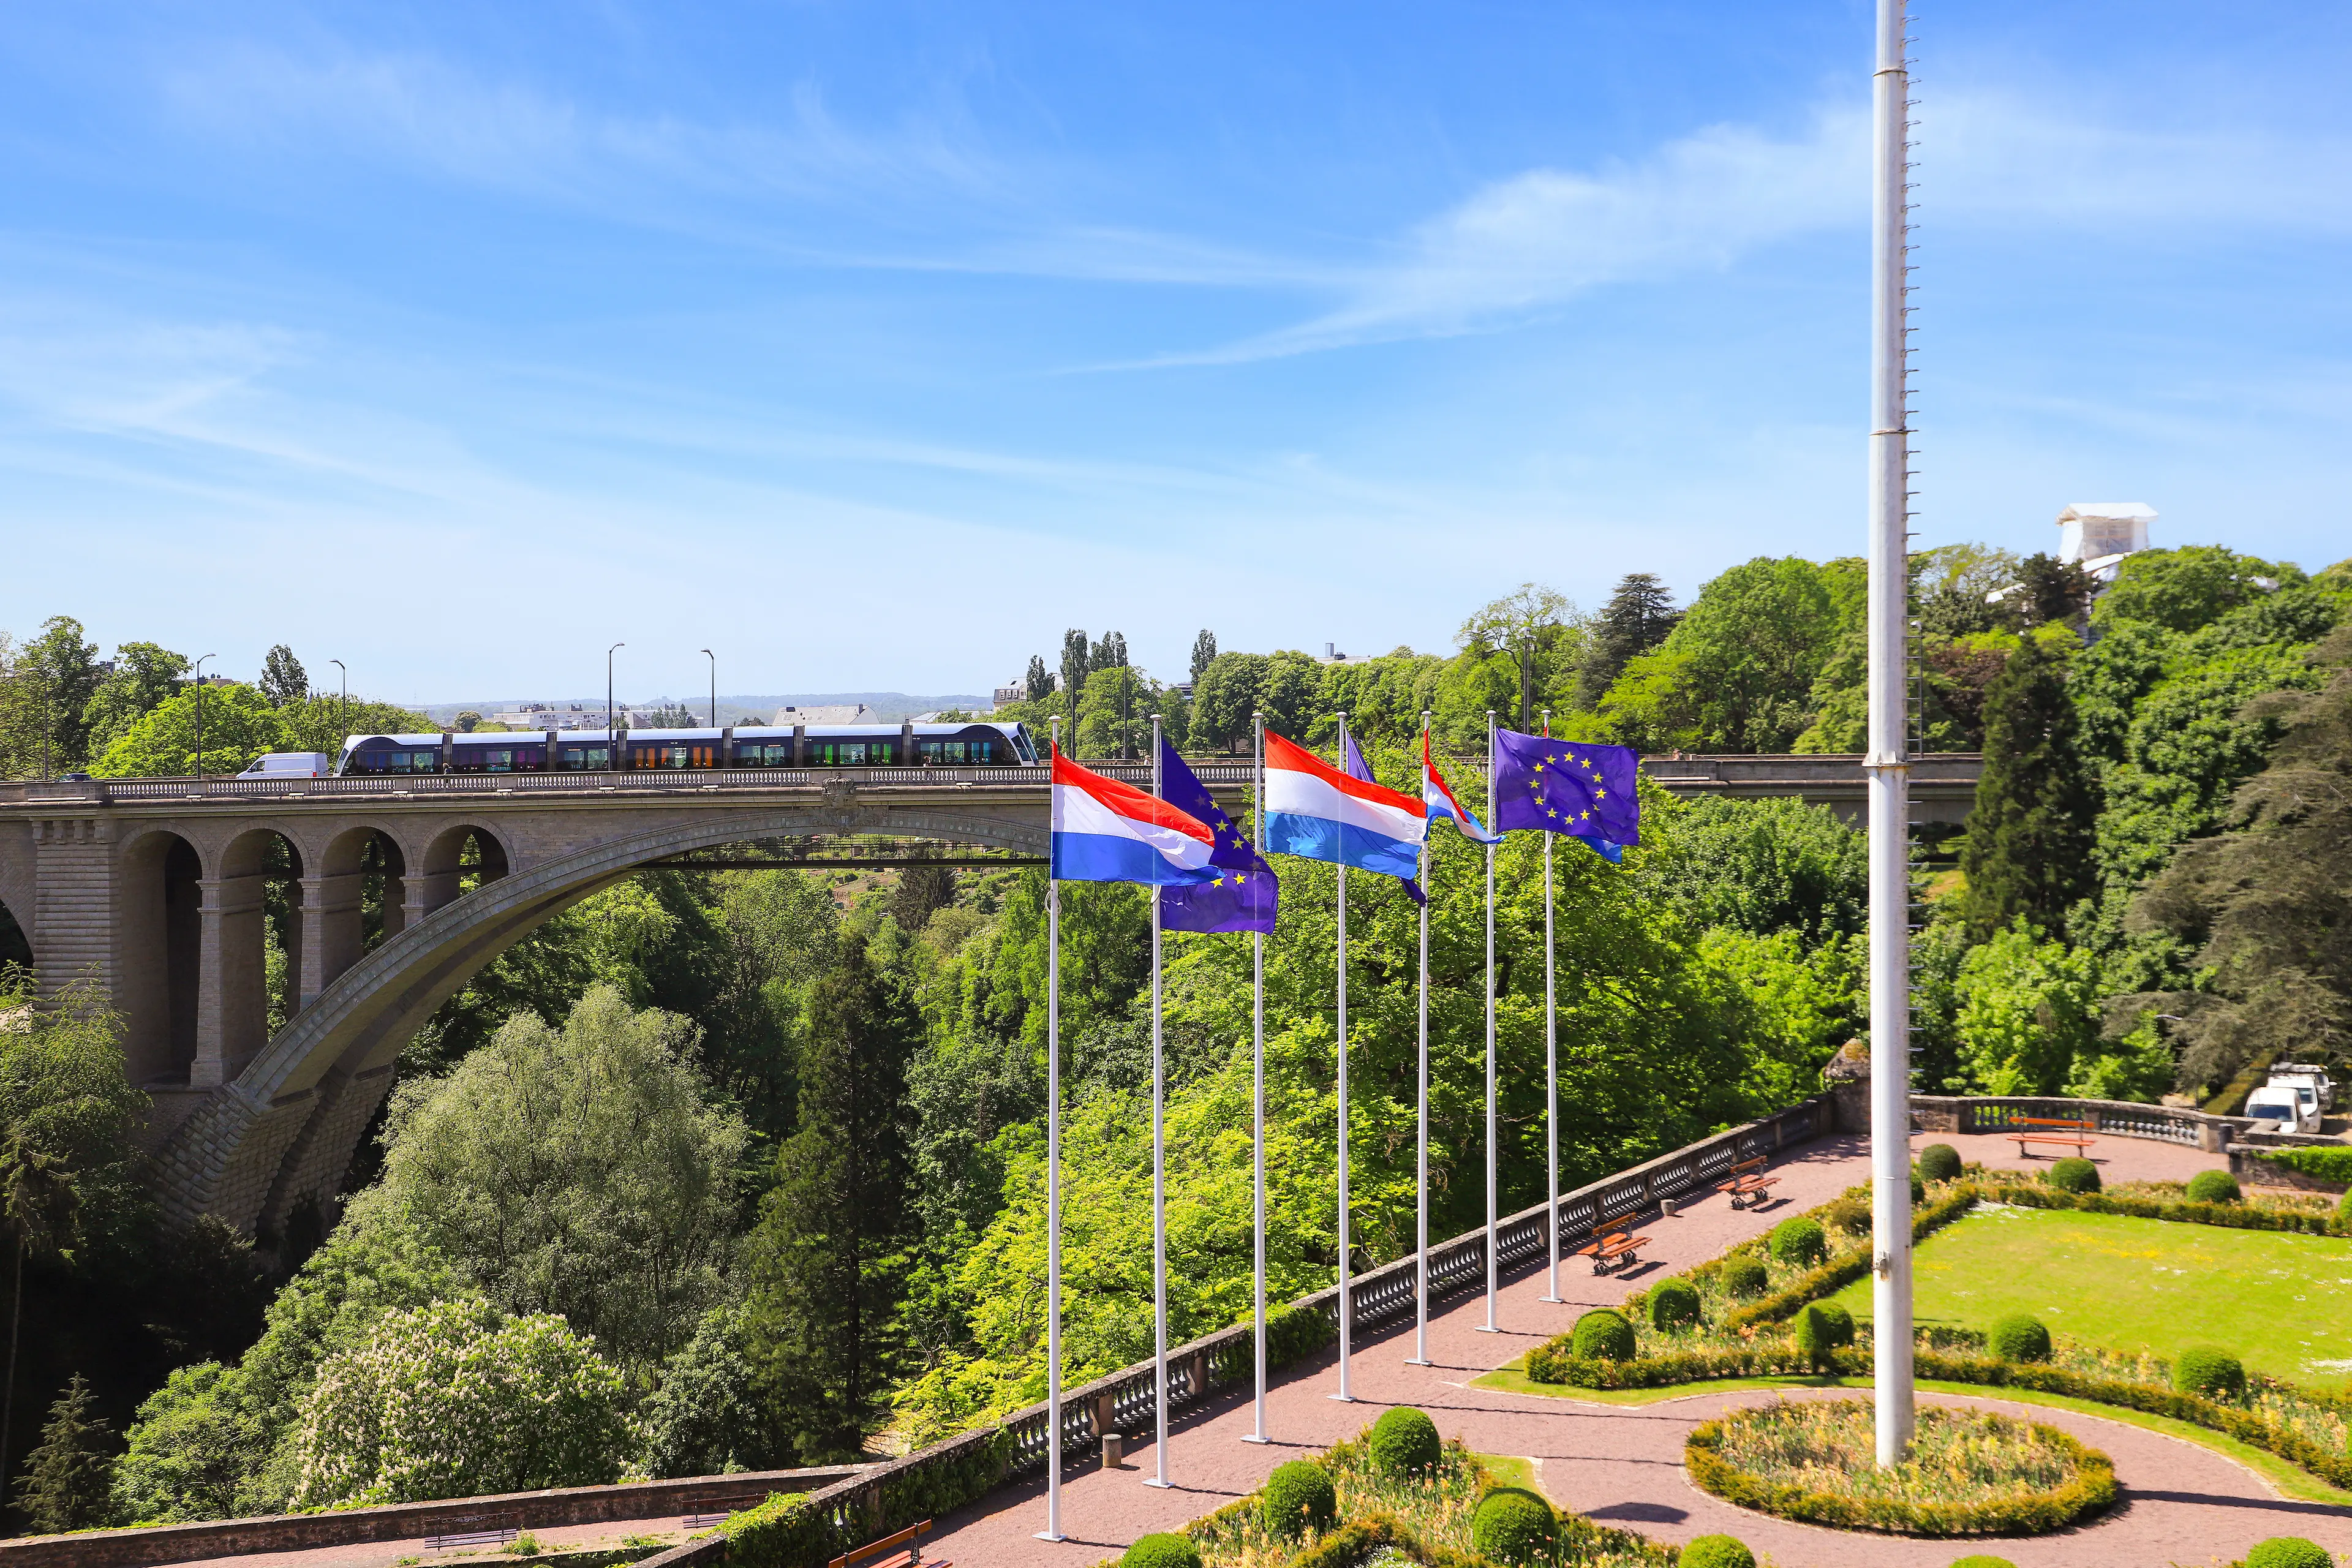 Explore Luxembourg: A Three-Day Travel Itinerary